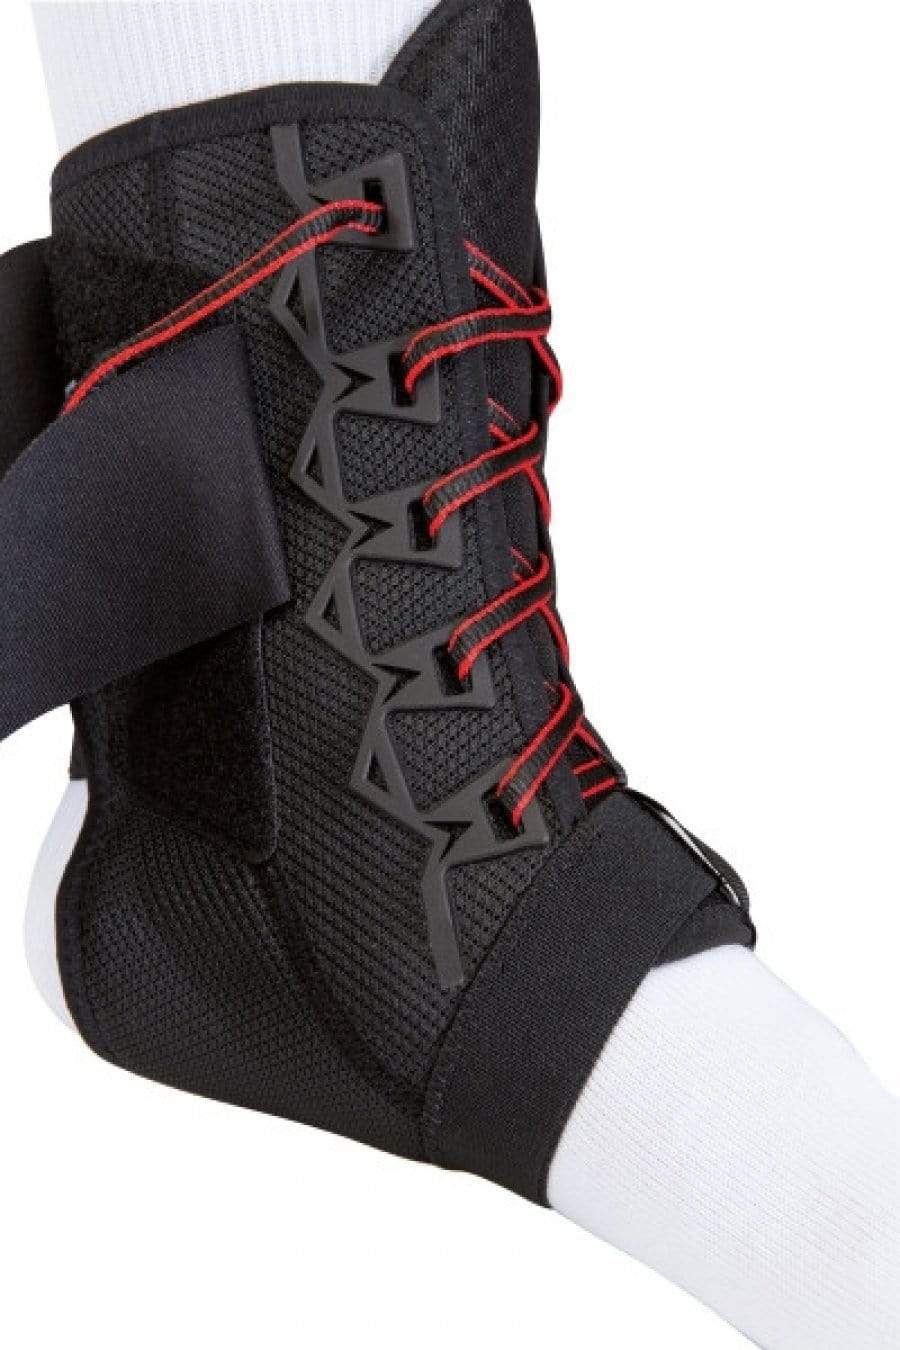 THE ONE ANKLE BRACE MUELLER PREMIUM LACE UP WITH FIGURE 8 STRAPPING